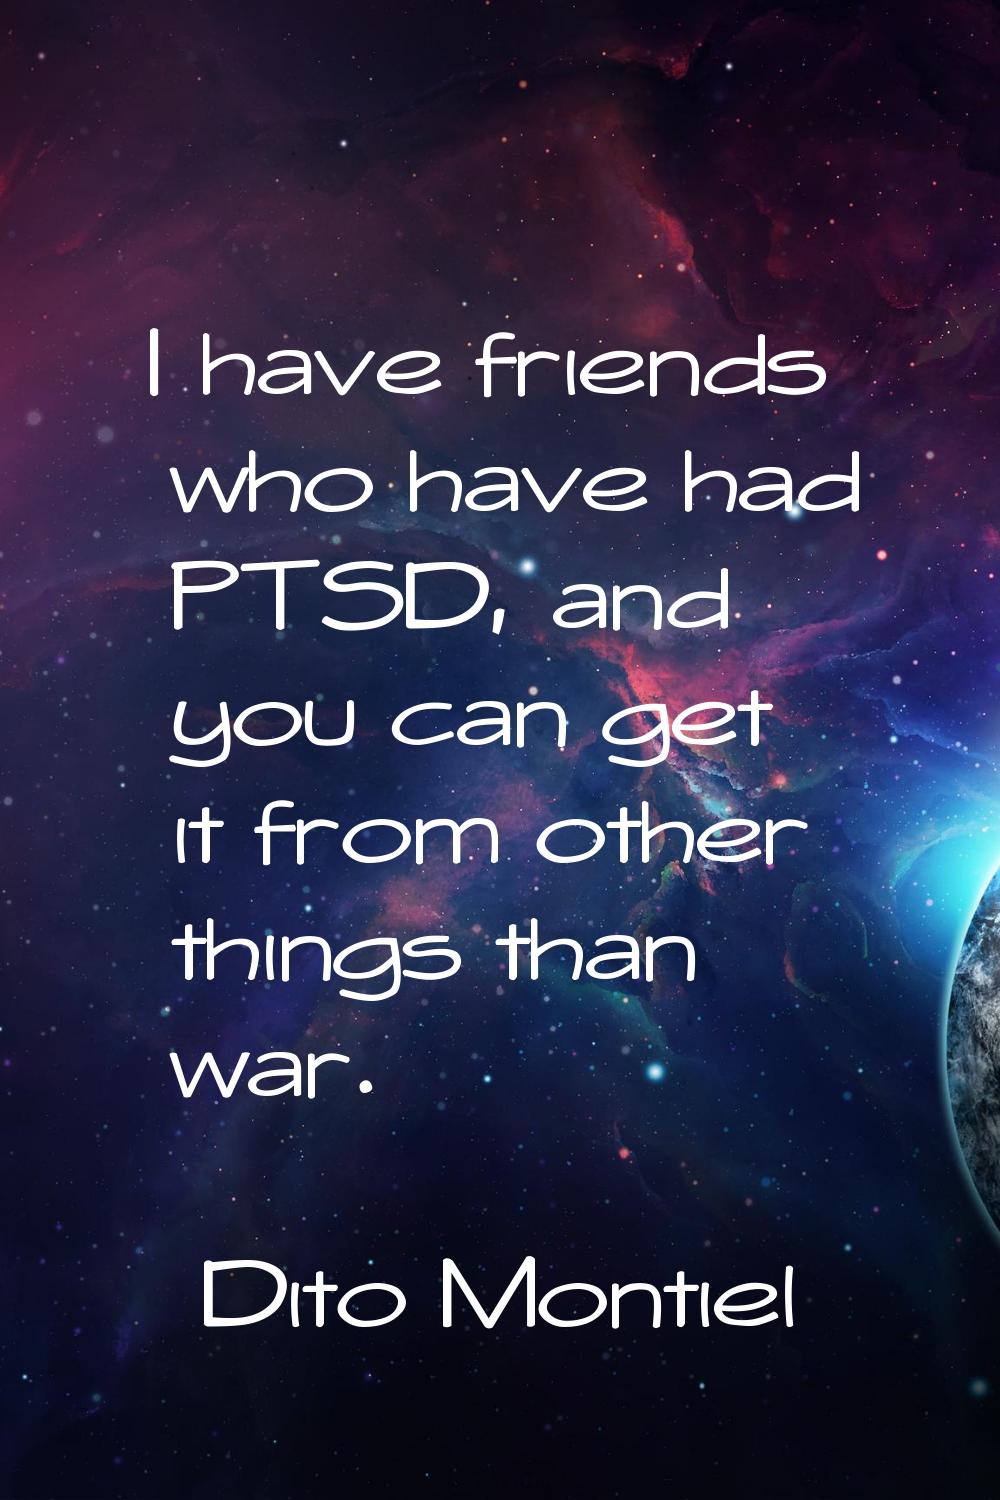 I have friends who have had PTSD, and you can get it from other things than war.